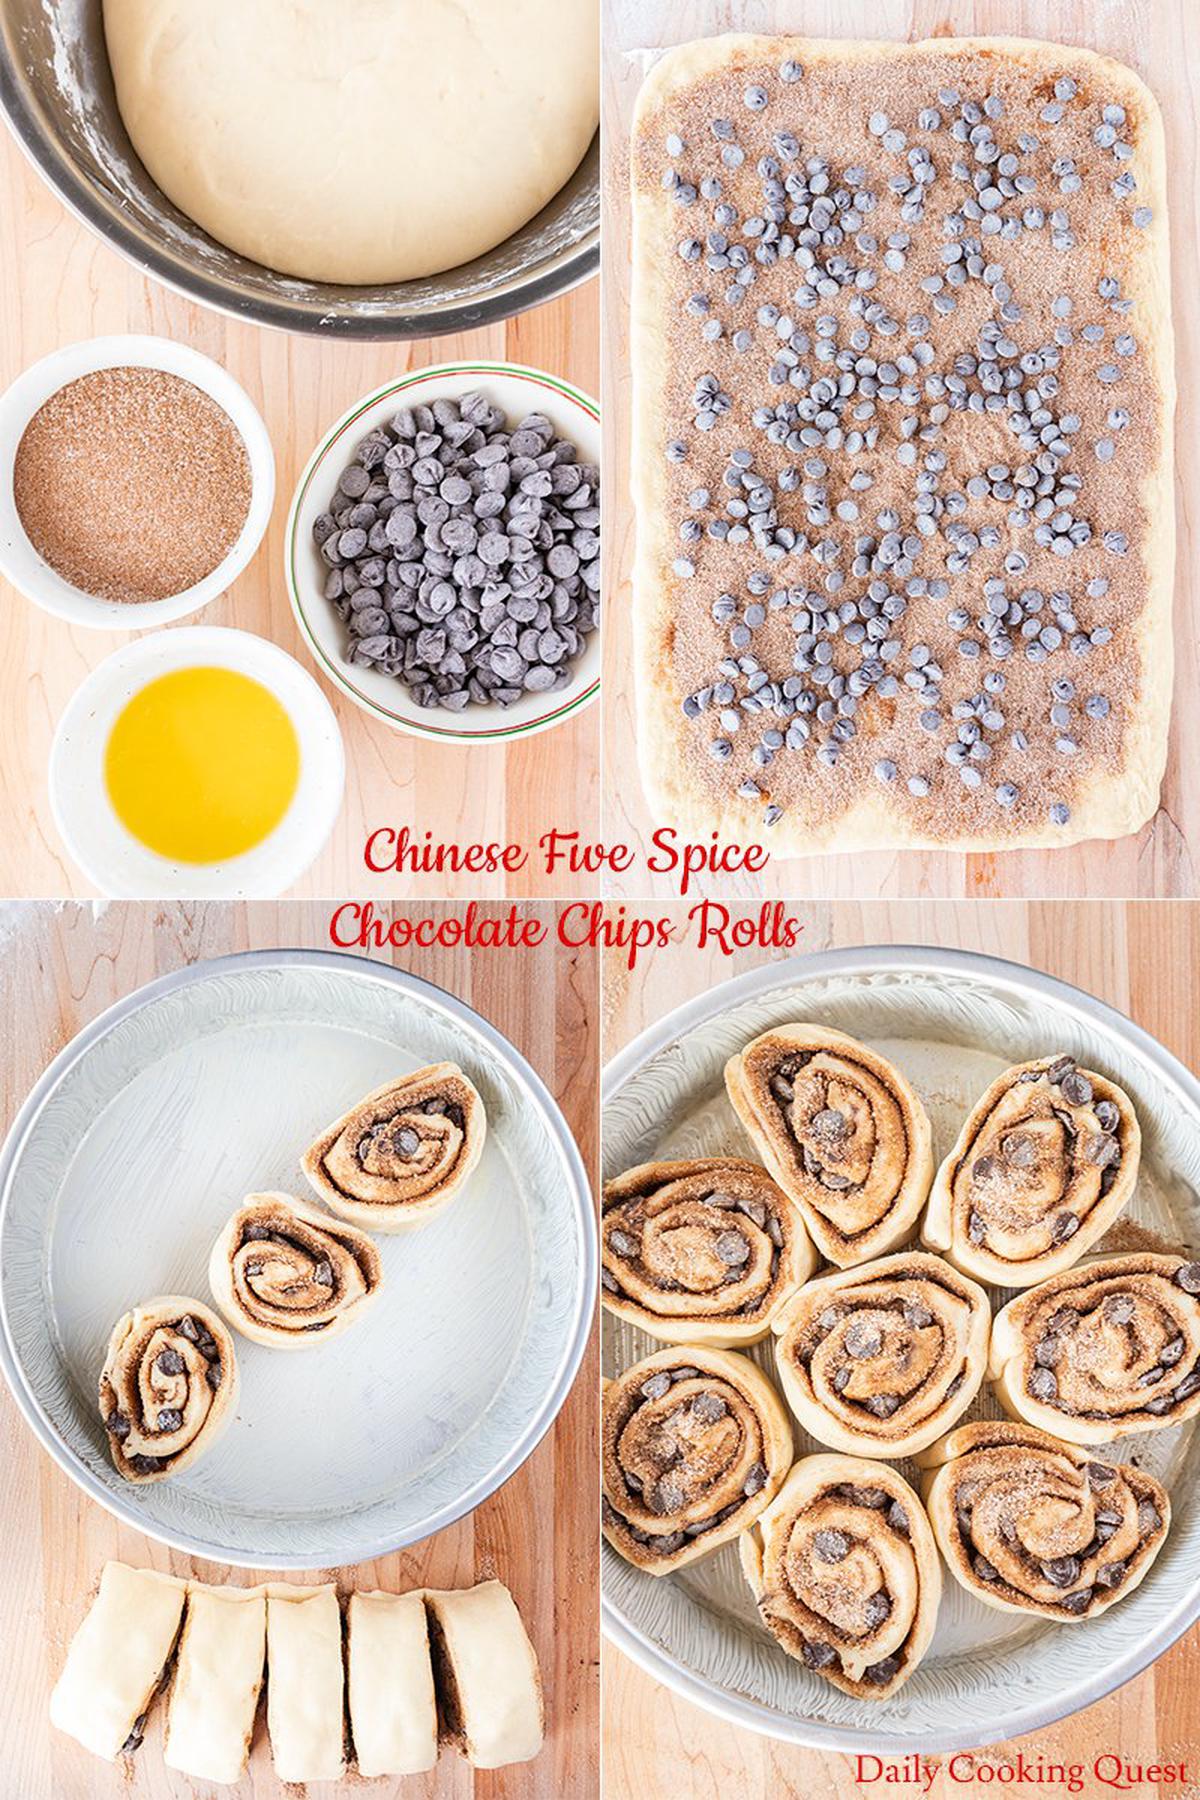 Chinese Five Spice Chocolate Chips Rolls